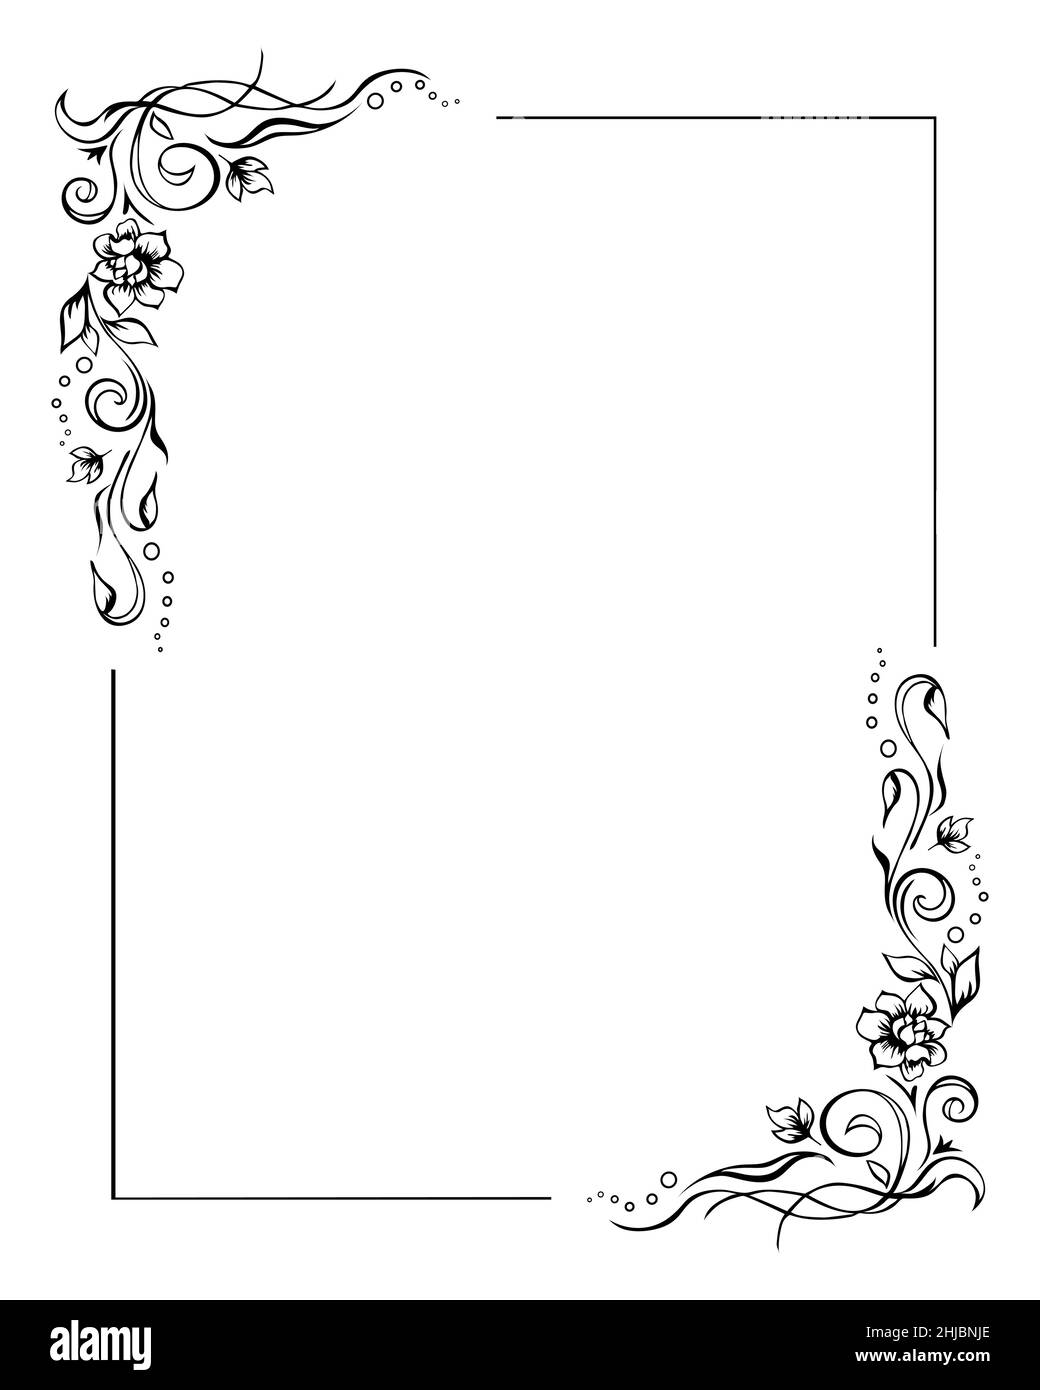 page corner borders black and white clipart